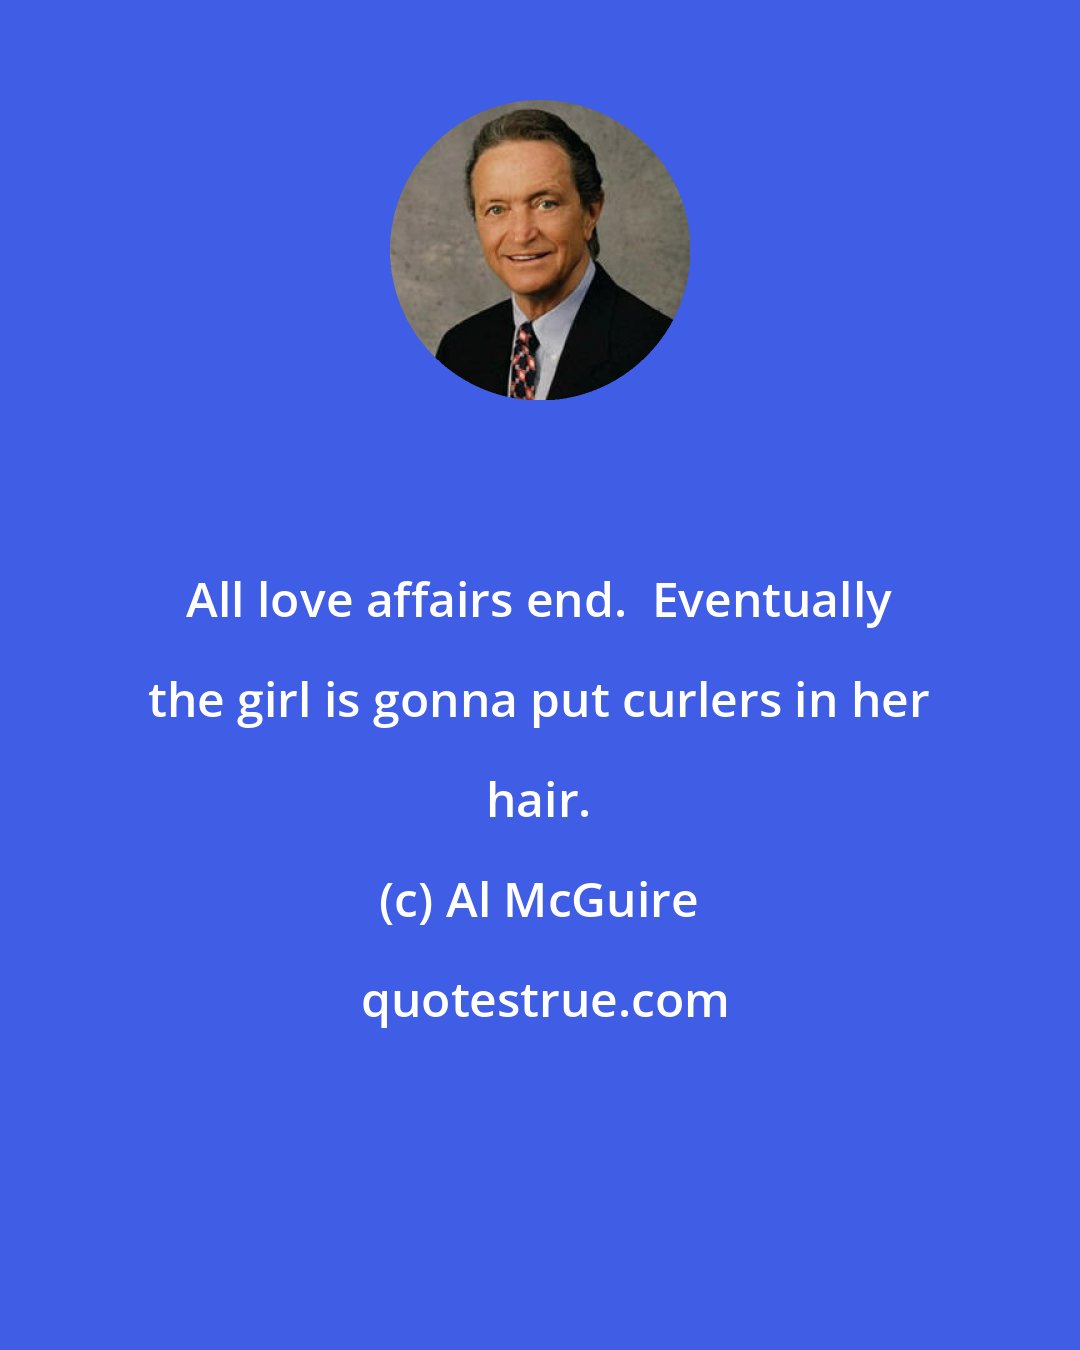 Al McGuire: All love affairs end.  Eventually the girl is gonna put curlers in her hair.